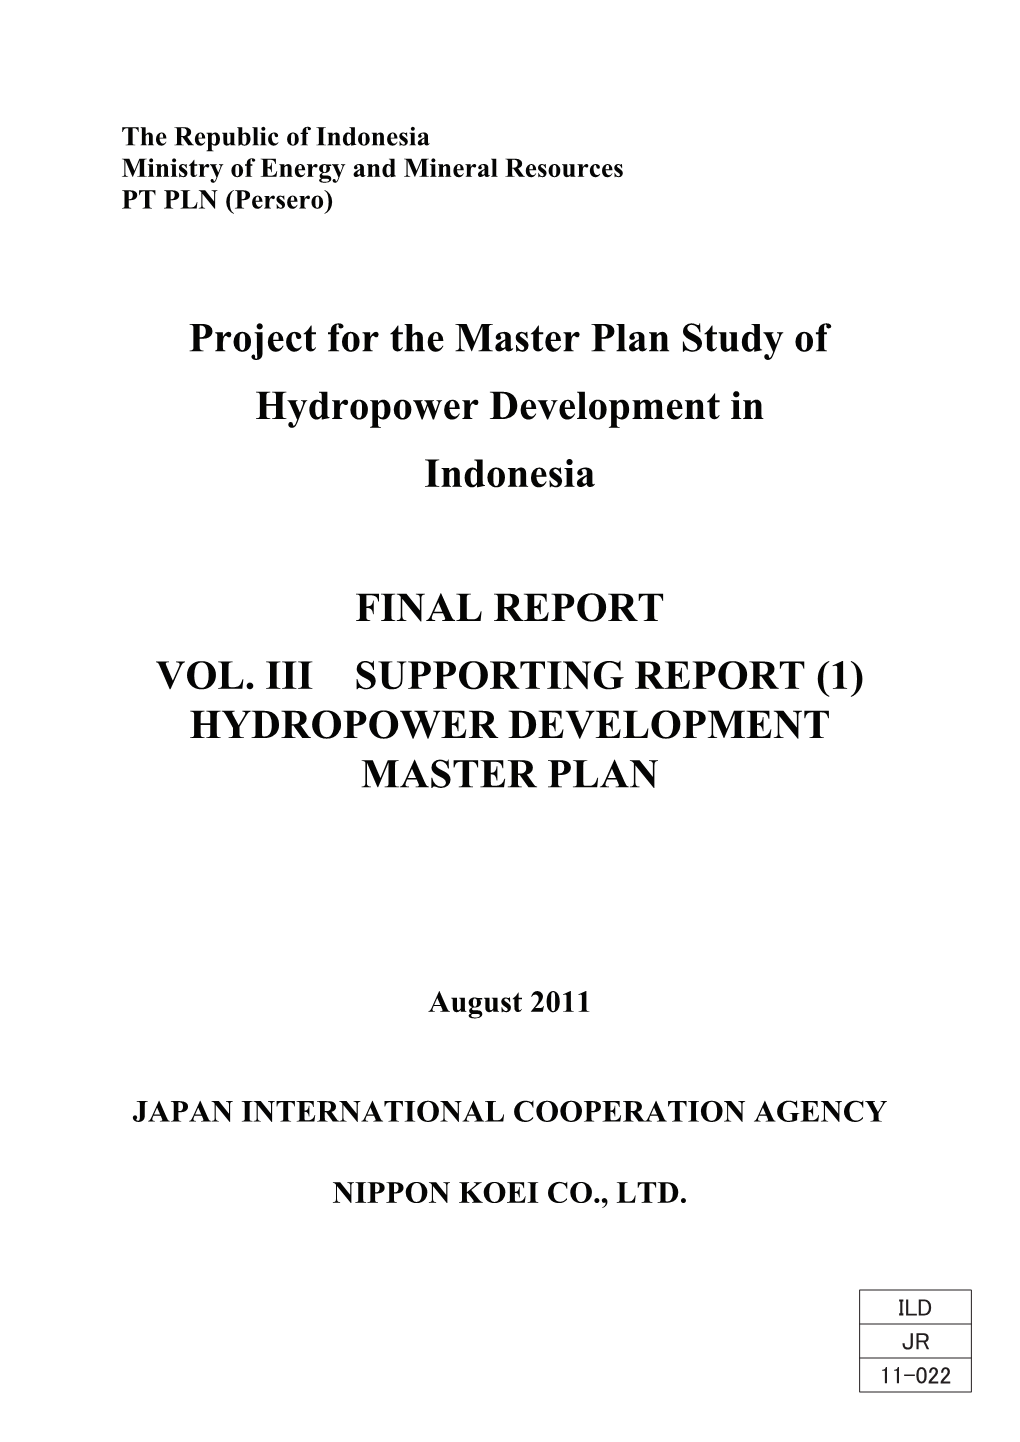 Project for the Master Plan Study of Hydropower Development in Indonesia